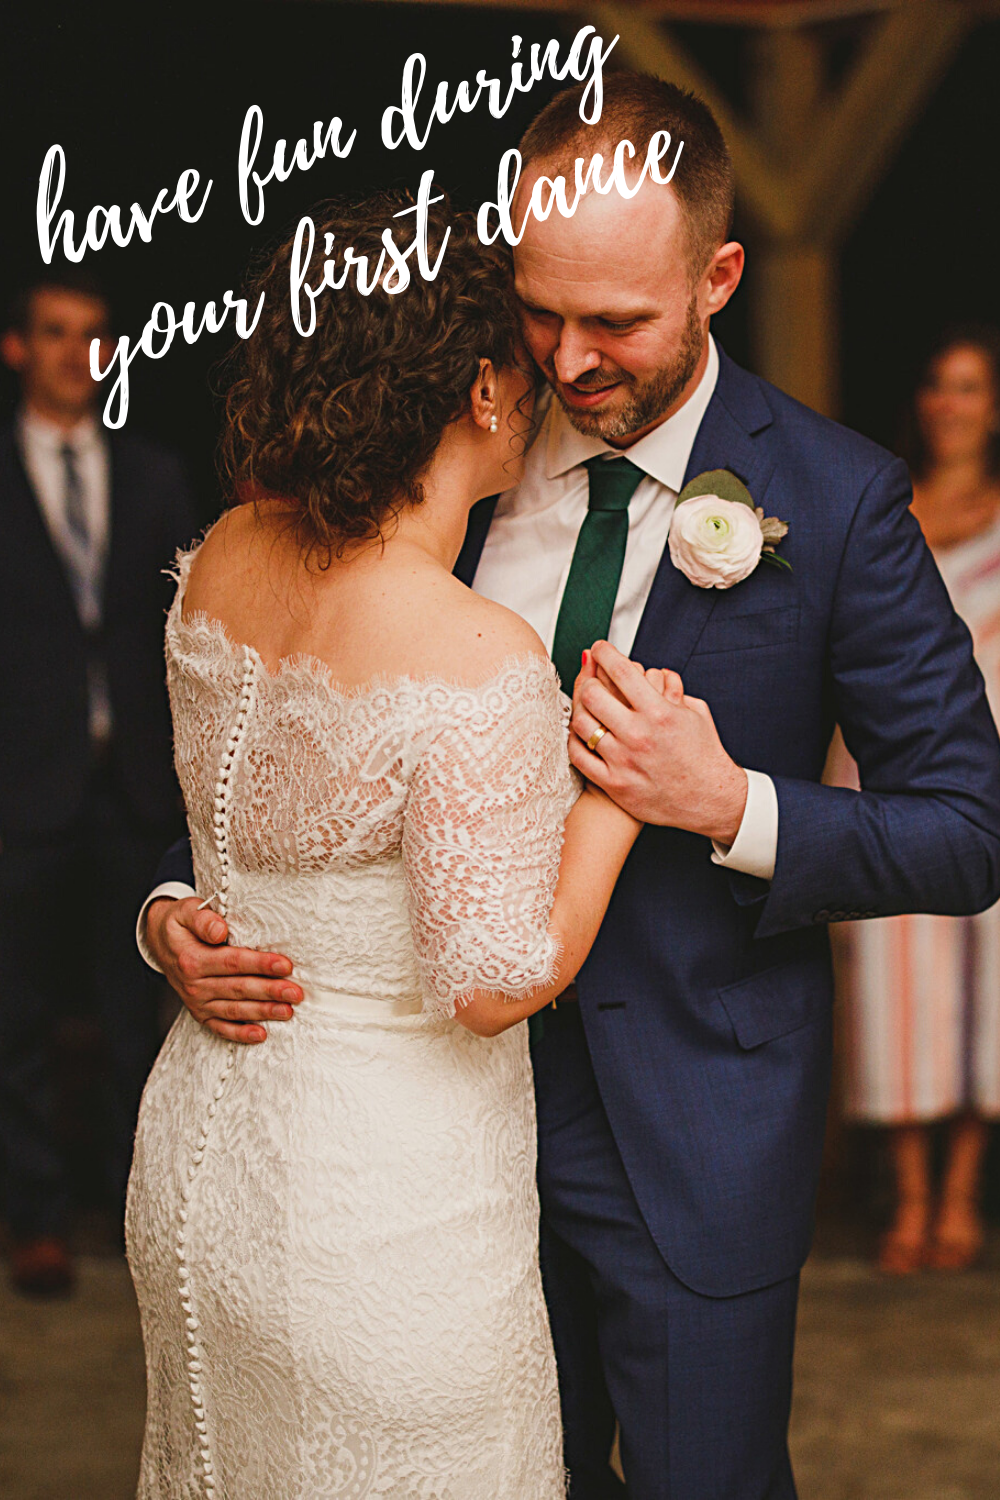 Into The Mystic - Van Morrison - have fun during your first dance